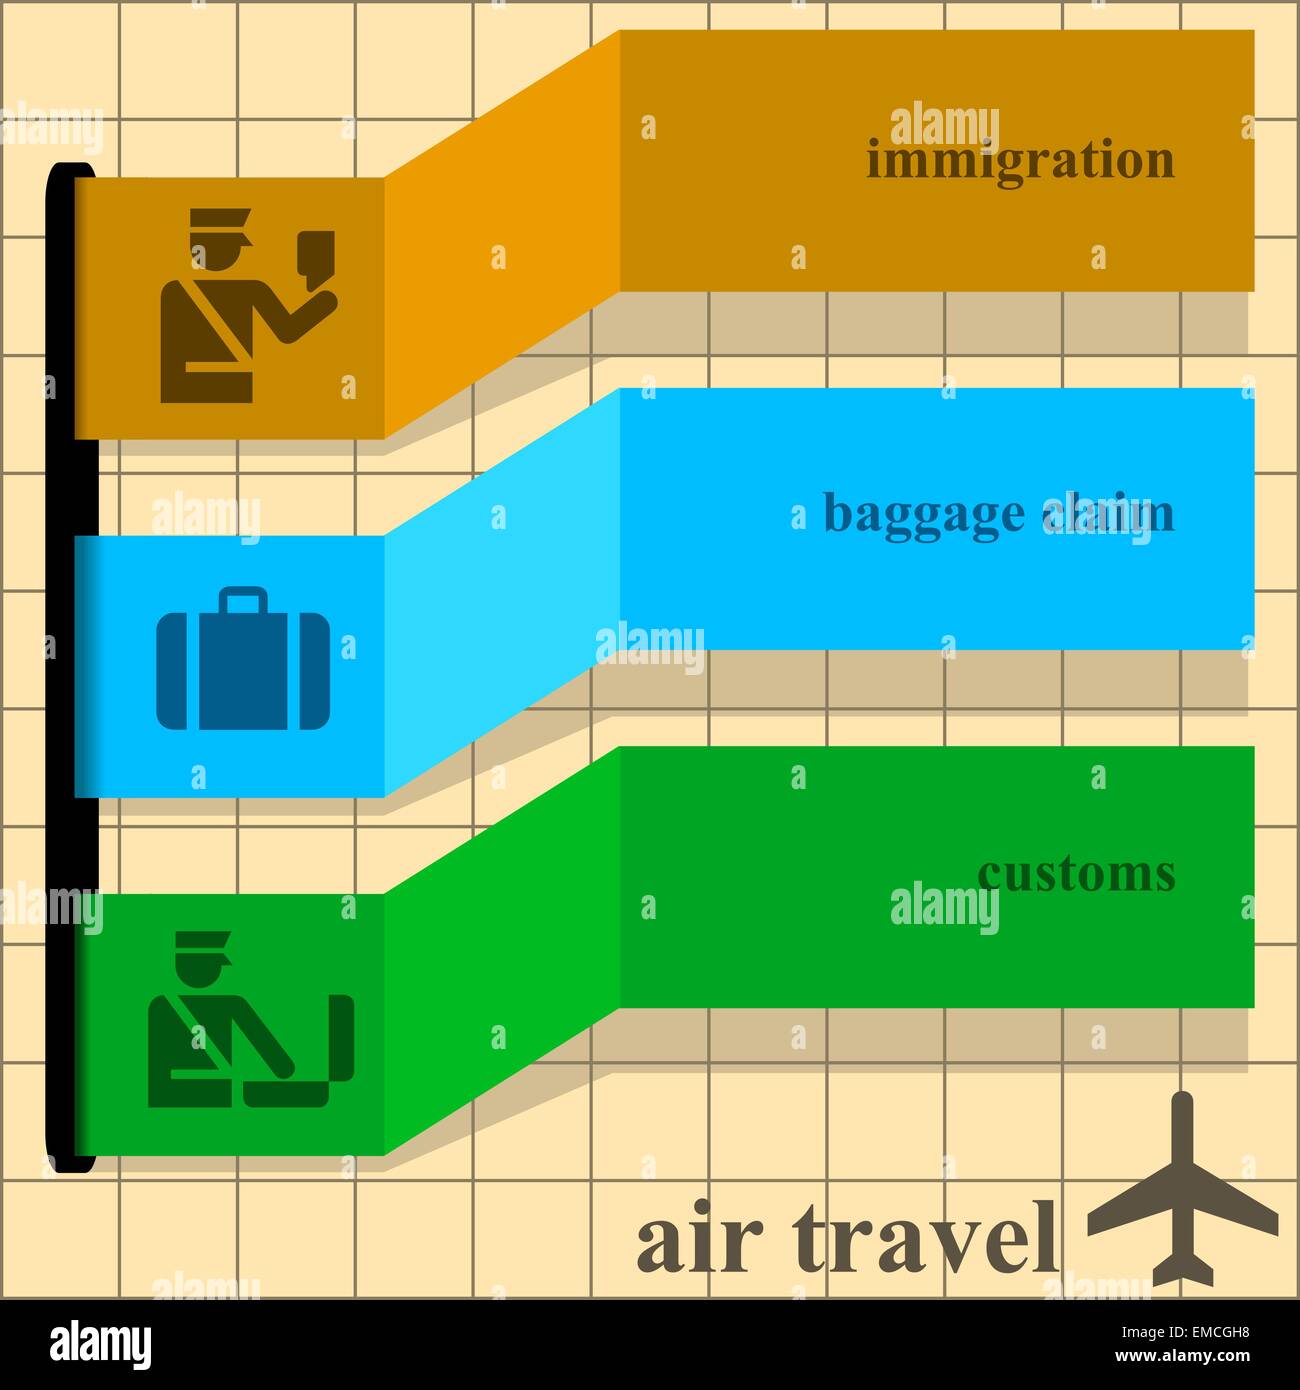 Air travel instructions Stock Vector